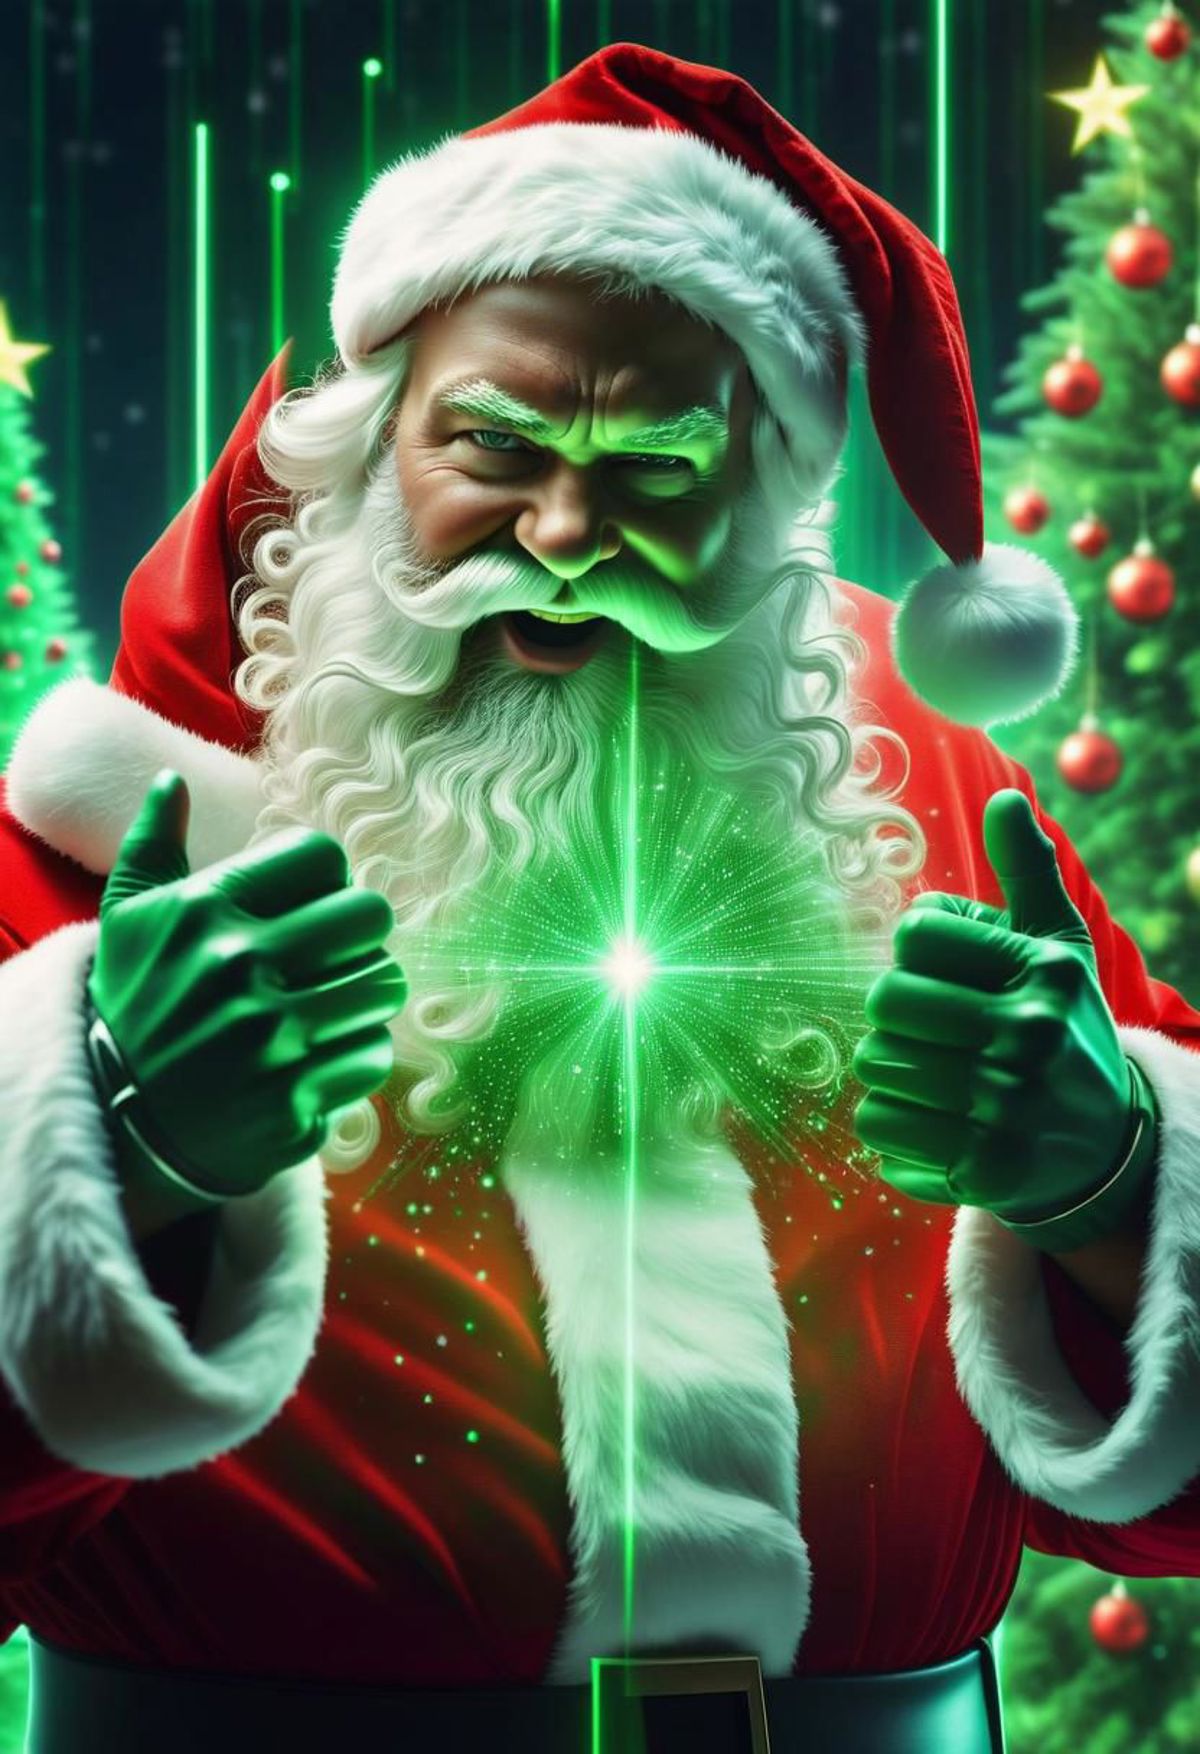 A digital artwork of Santa Claus with a green glowing light, throwing a thumbs up.